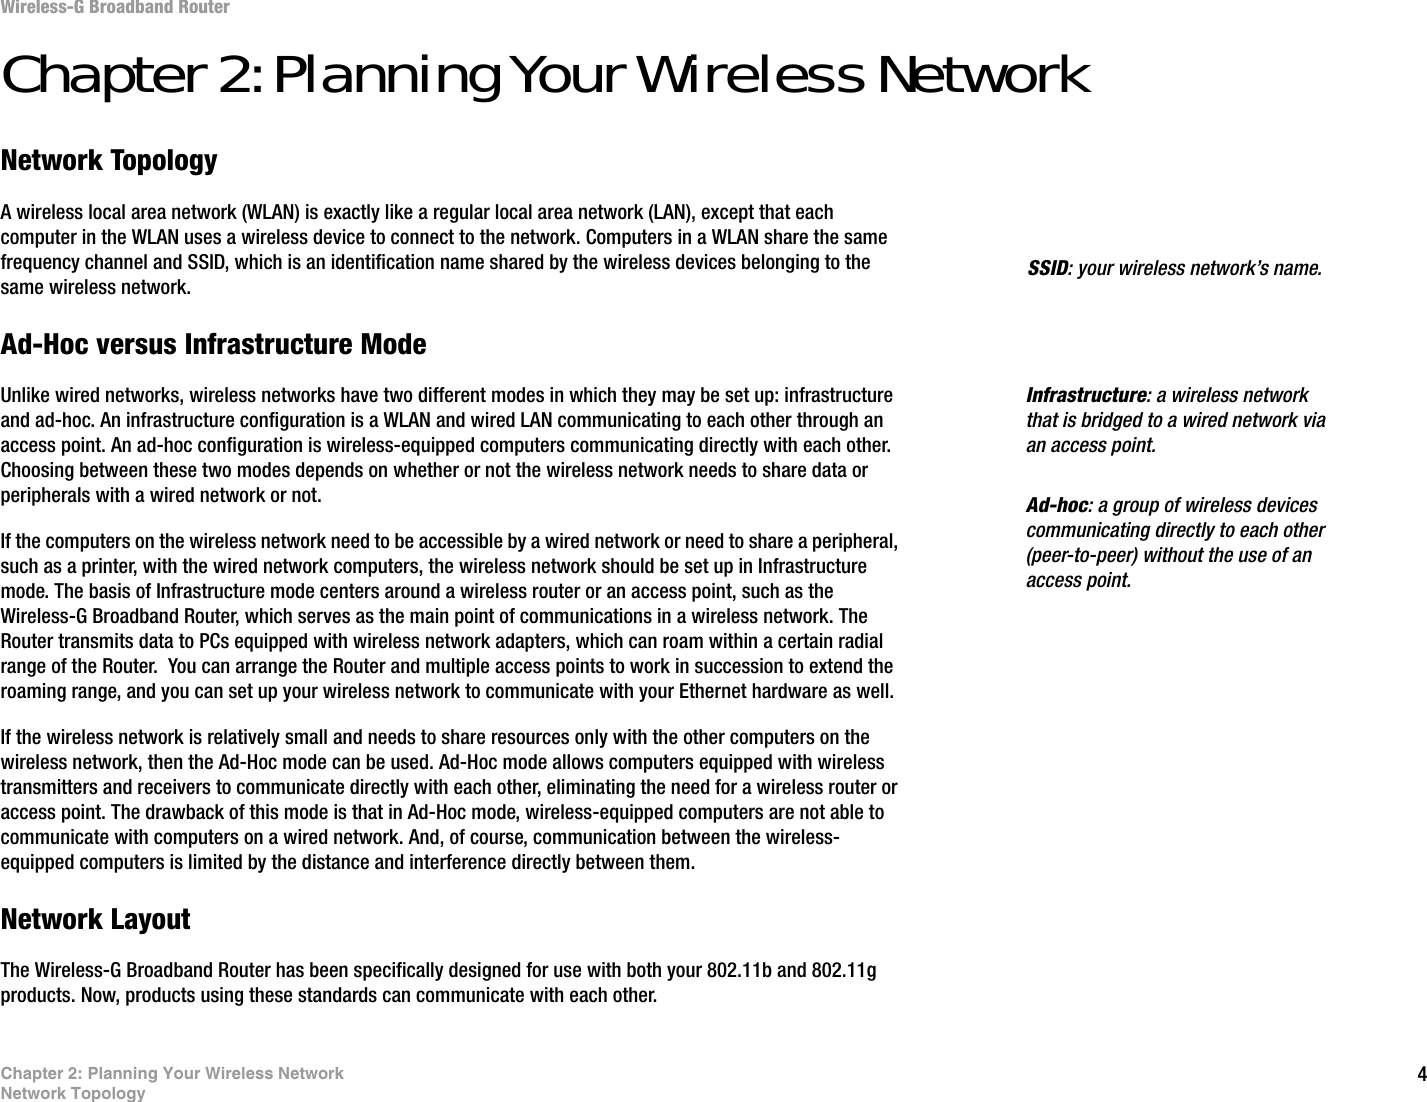 4Chapter 2: Planning Your Wireless NetworkNetwork TopologyWireless-G Broadband RouterChapter 2: Planning Your Wireless NetworkNetwork TopologyA wireless local area network (WLAN) is exactly like a regular local area network (LAN), except that each computer in the WLAN uses a wireless device to connect to the network. Computers in a WLAN share the same frequency channel and SSID, which is an identification name shared by the wireless devices belonging to the same wireless network.Ad-Hoc versus Infrastructure ModeUnlike wired networks, wireless networks have two different modes in which they may be set up: infrastructure and ad-hoc. An infrastructure configuration is a WLAN and wired LAN communicating to each other through an access point. An ad-hoc configuration is wireless-equipped computers communicating directly with each other. Choosing between these two modes depends on whether or not the wireless network needs to share data or peripherals with a wired network or not. If the computers on the wireless network need to be accessible by a wired network or need to share a peripheral, such as a printer, with the wired network computers, the wireless network should be set up in Infrastructure mode. The basis of Infrastructure mode centers around a wireless router or an access point, such as the Wireless-G Broadband Router, which serves as the main point of communications in a wireless network. The Router transmits data to PCs equipped with wireless network adapters, which can roam within a certain radial range of the Router.  You can arrange the Router and multiple access points to work in succession to extend the roaming range, and you can set up your wireless network to communicate with your Ethernet hardware as well. If the wireless network is relatively small and needs to share resources only with the other computers on the wireless network, then the Ad-Hoc mode can be used. Ad-Hoc mode allows computers equipped with wireless transmitters and receivers to communicate directly with each other, eliminating the need for a wireless router or access point. The drawback of this mode is that in Ad-Hoc mode, wireless-equipped computers are not able to communicate with computers on a wired network. And, of course, communication between the wireless-equipped computers is limited by the distance and interference directly between them. Network LayoutThe Wireless-G Broadband Router has been specifically designed for use with both your 802.11b and 802.11g products. Now, products using these standards can communicate with each other.Infrastructure: a wireless network that is bridged to a wired network via an access point.SSID: your wireless network’s name.Ad-hoc: a group of wireless devices communicating directly to each other (peer-to-peer) without the use of an access point.